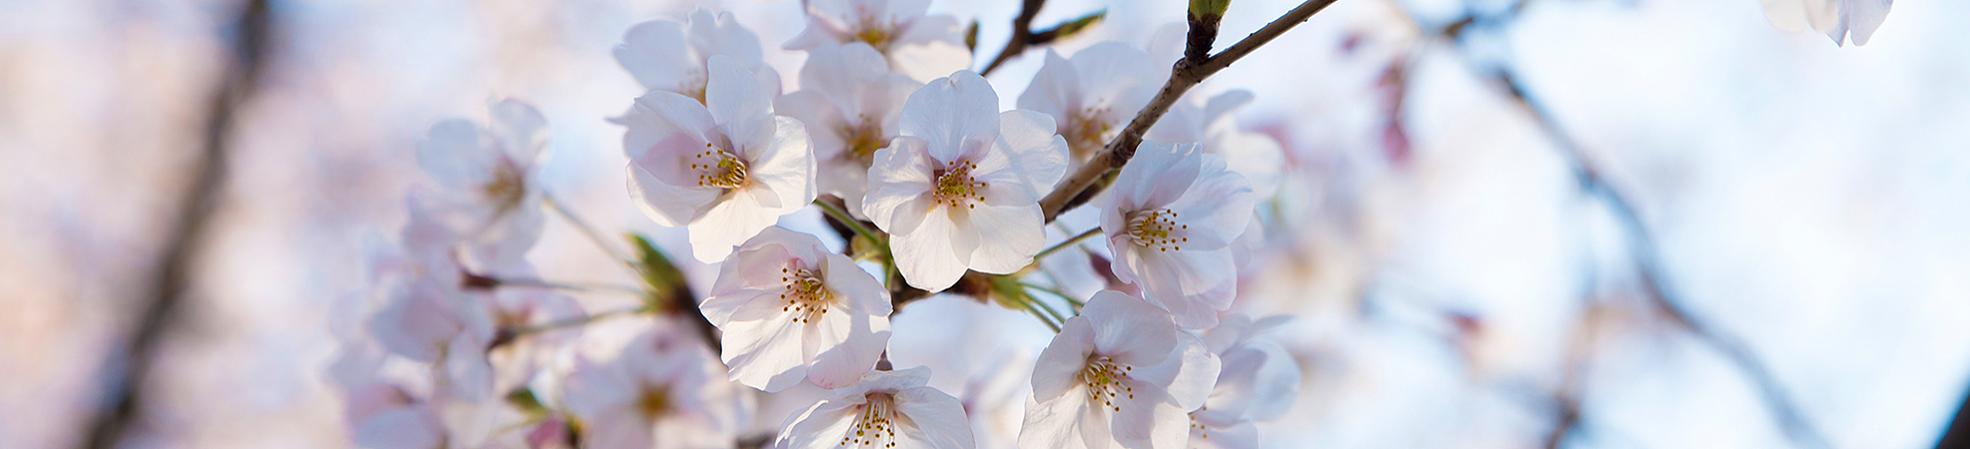 Best Places to See Cherry Blossoms in Japan